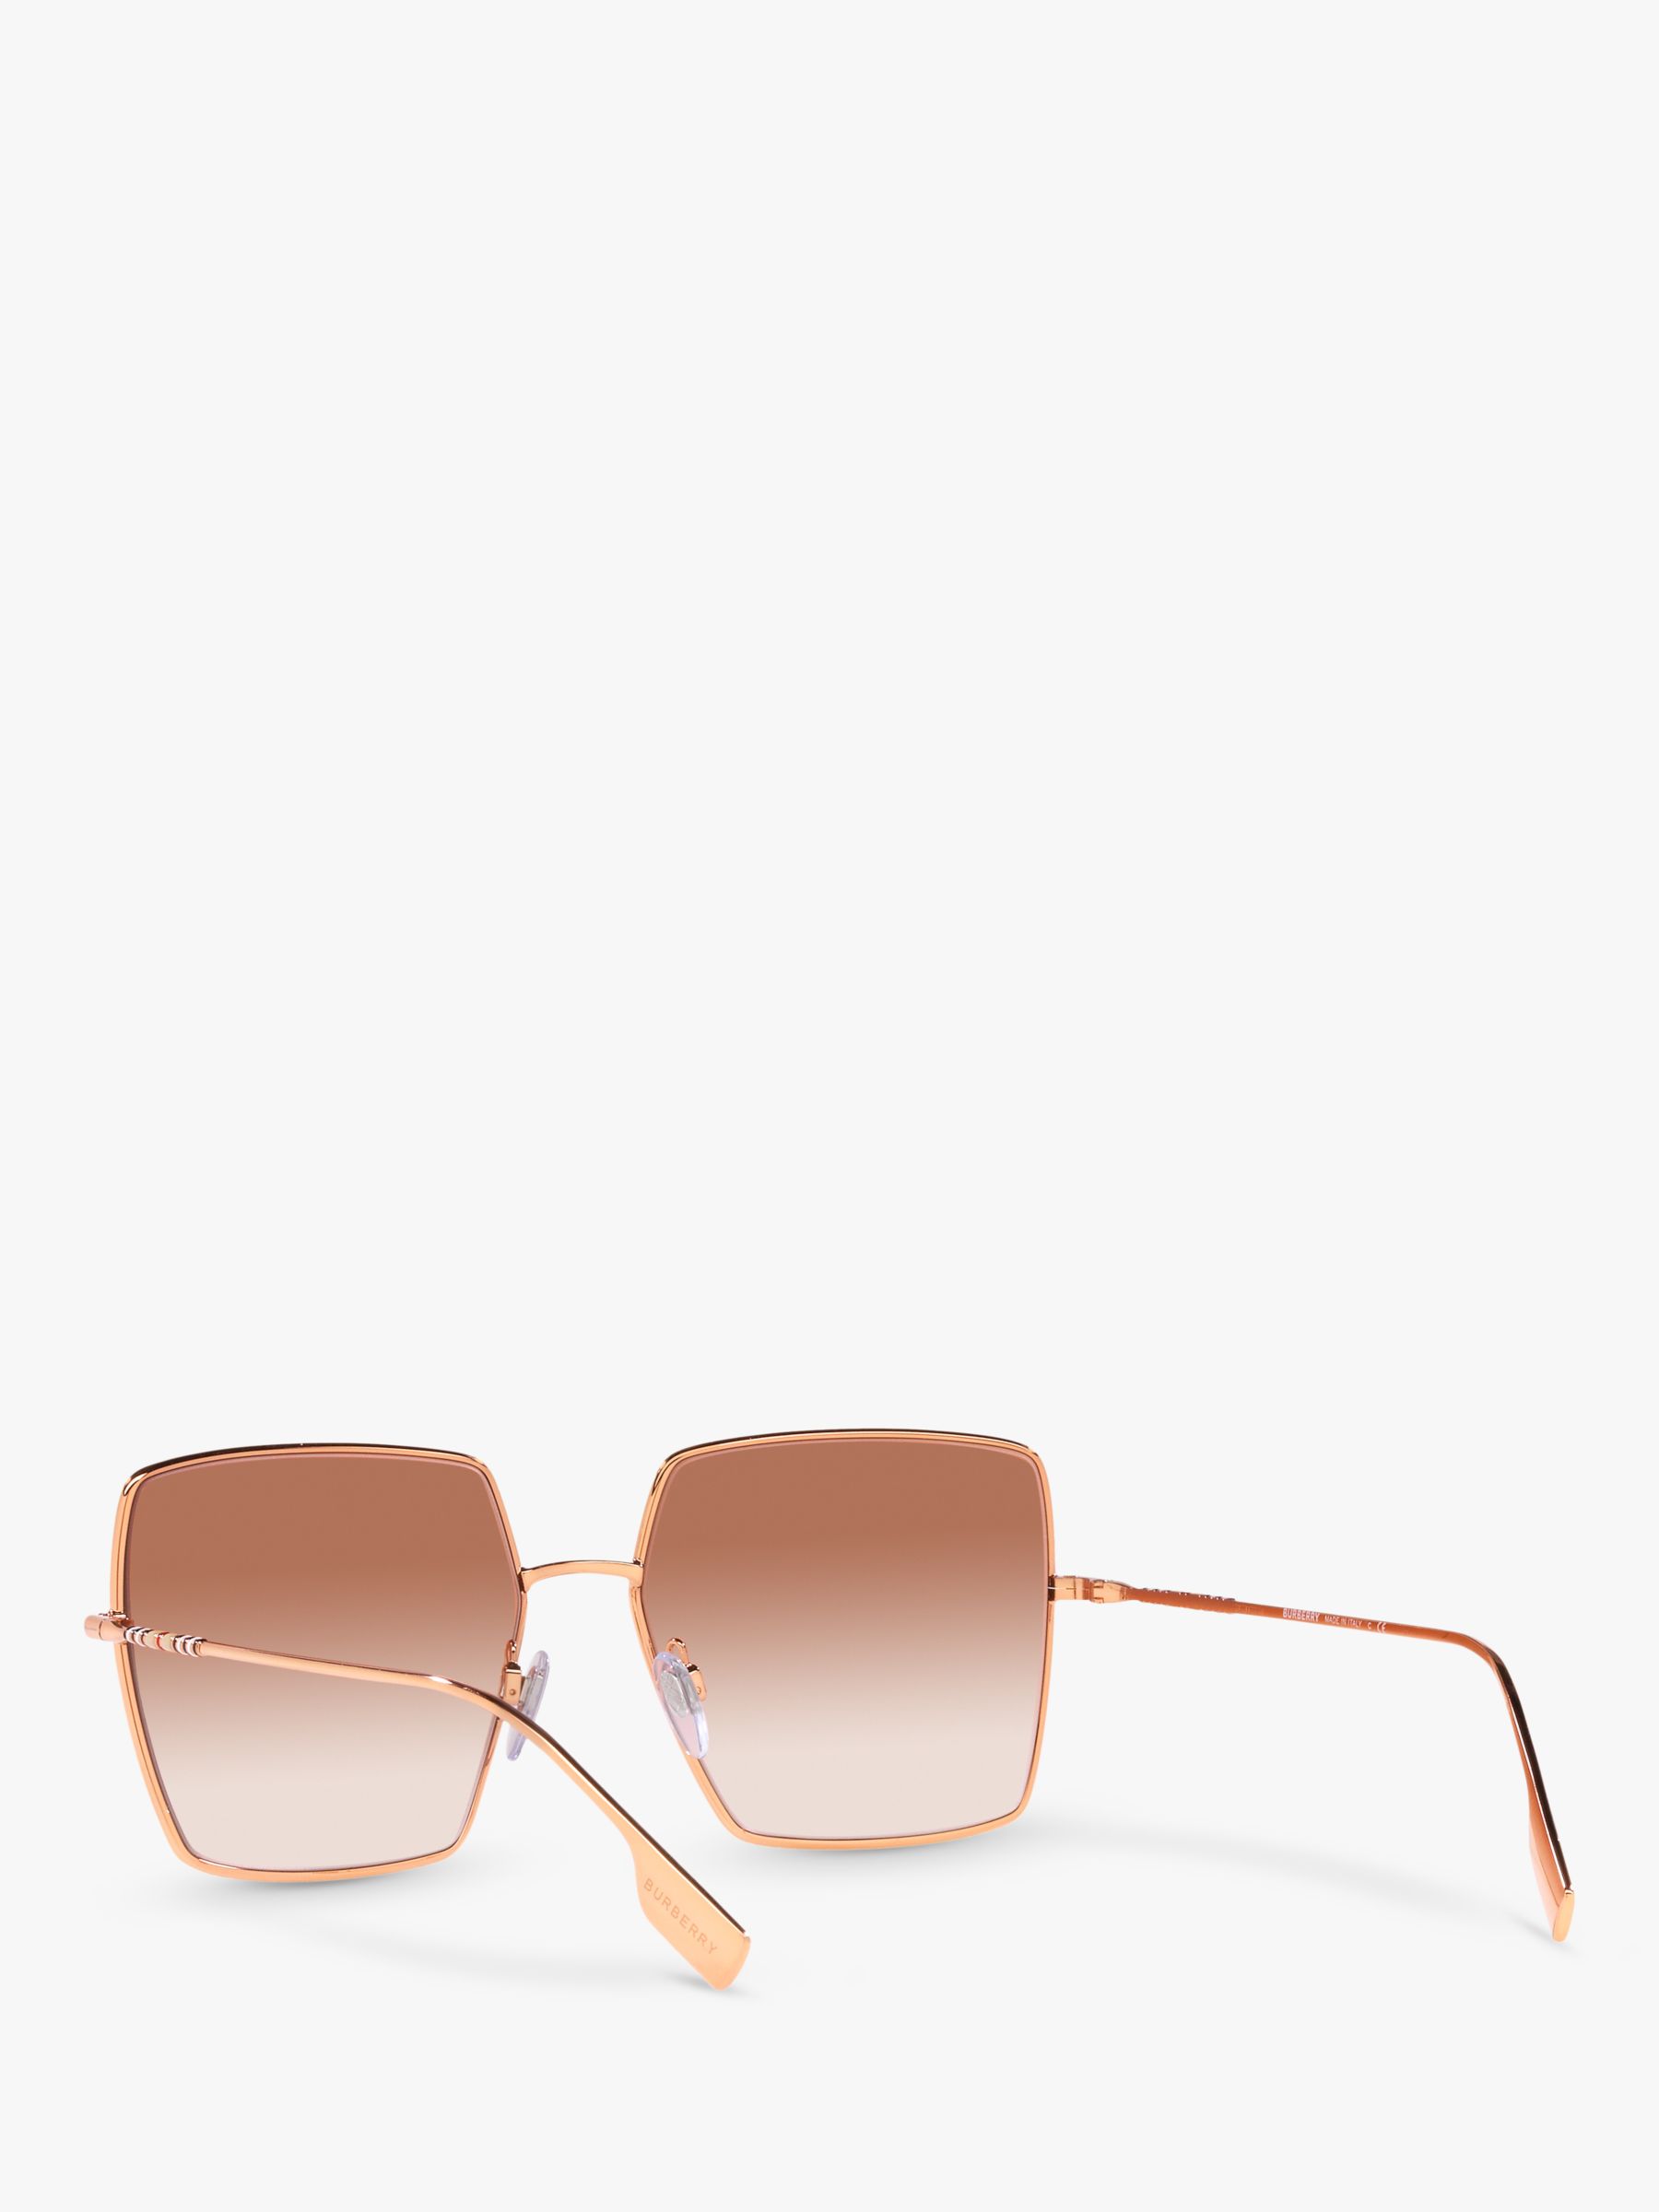 Burberry BE3133 Women's Daphne Square Sunglasses, Rose Gold/Pink Gradient  at John Lewis & Partners